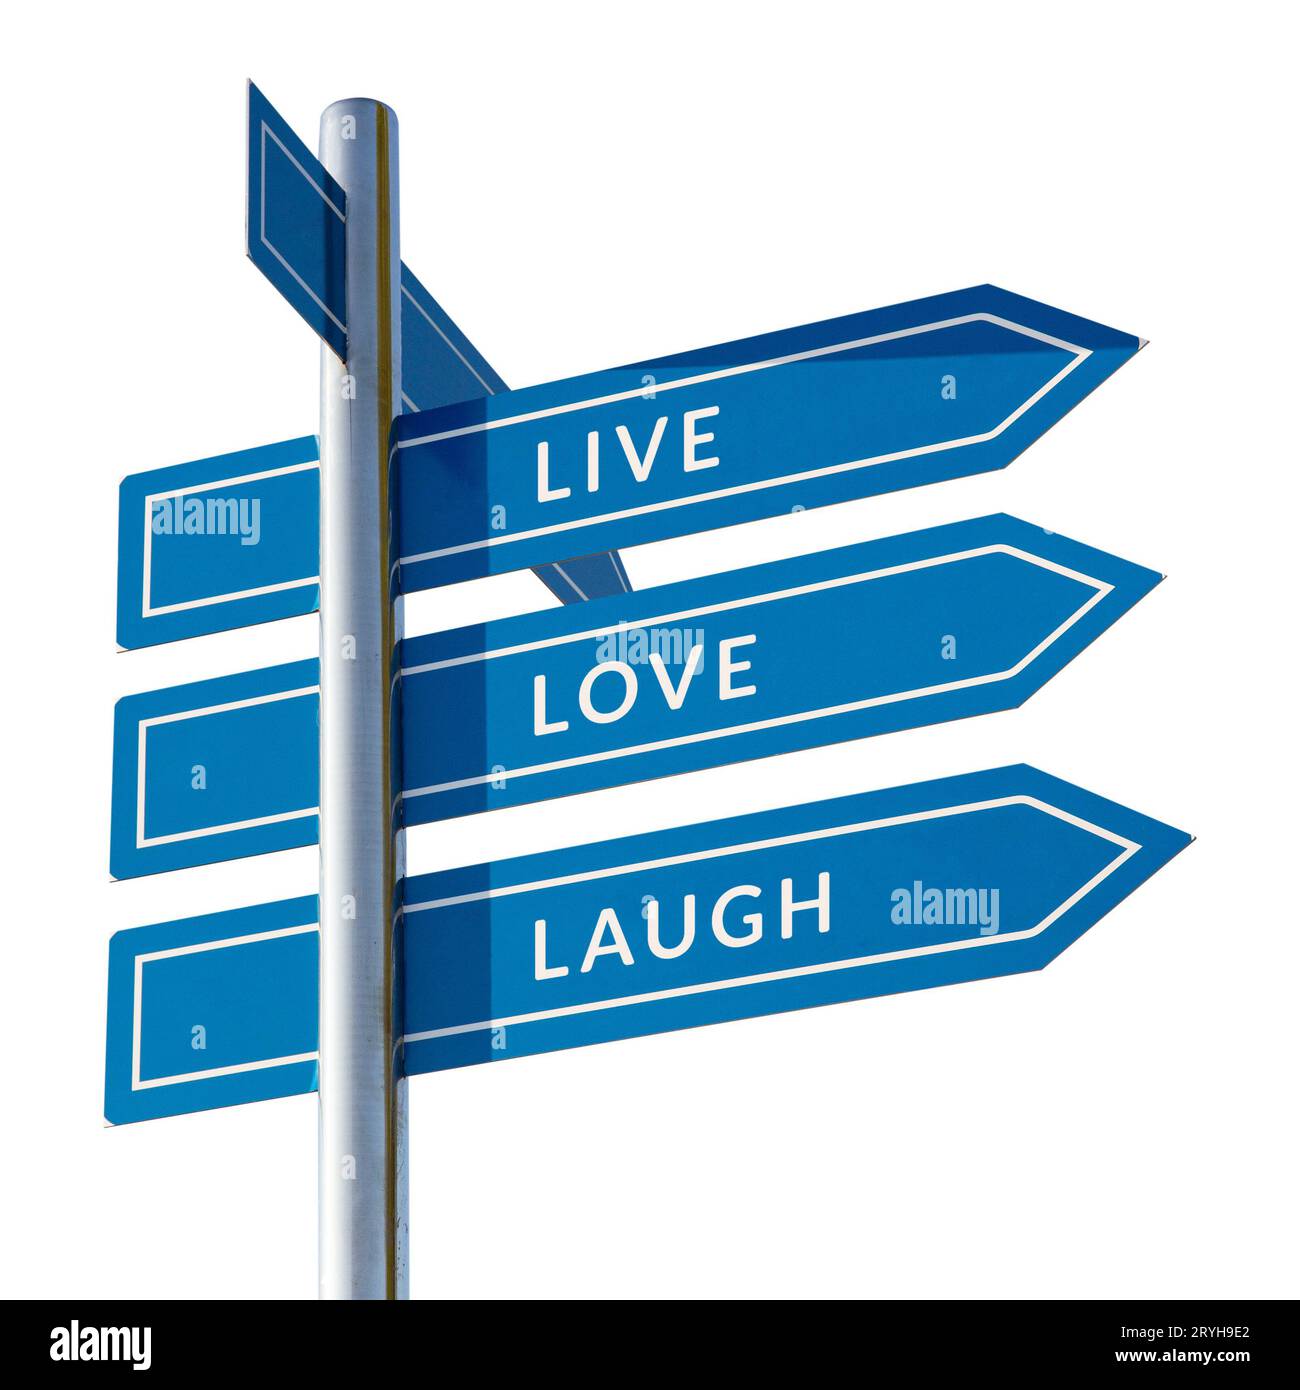 Live Love Laugh message on signpost isolated on white background Stock Photo